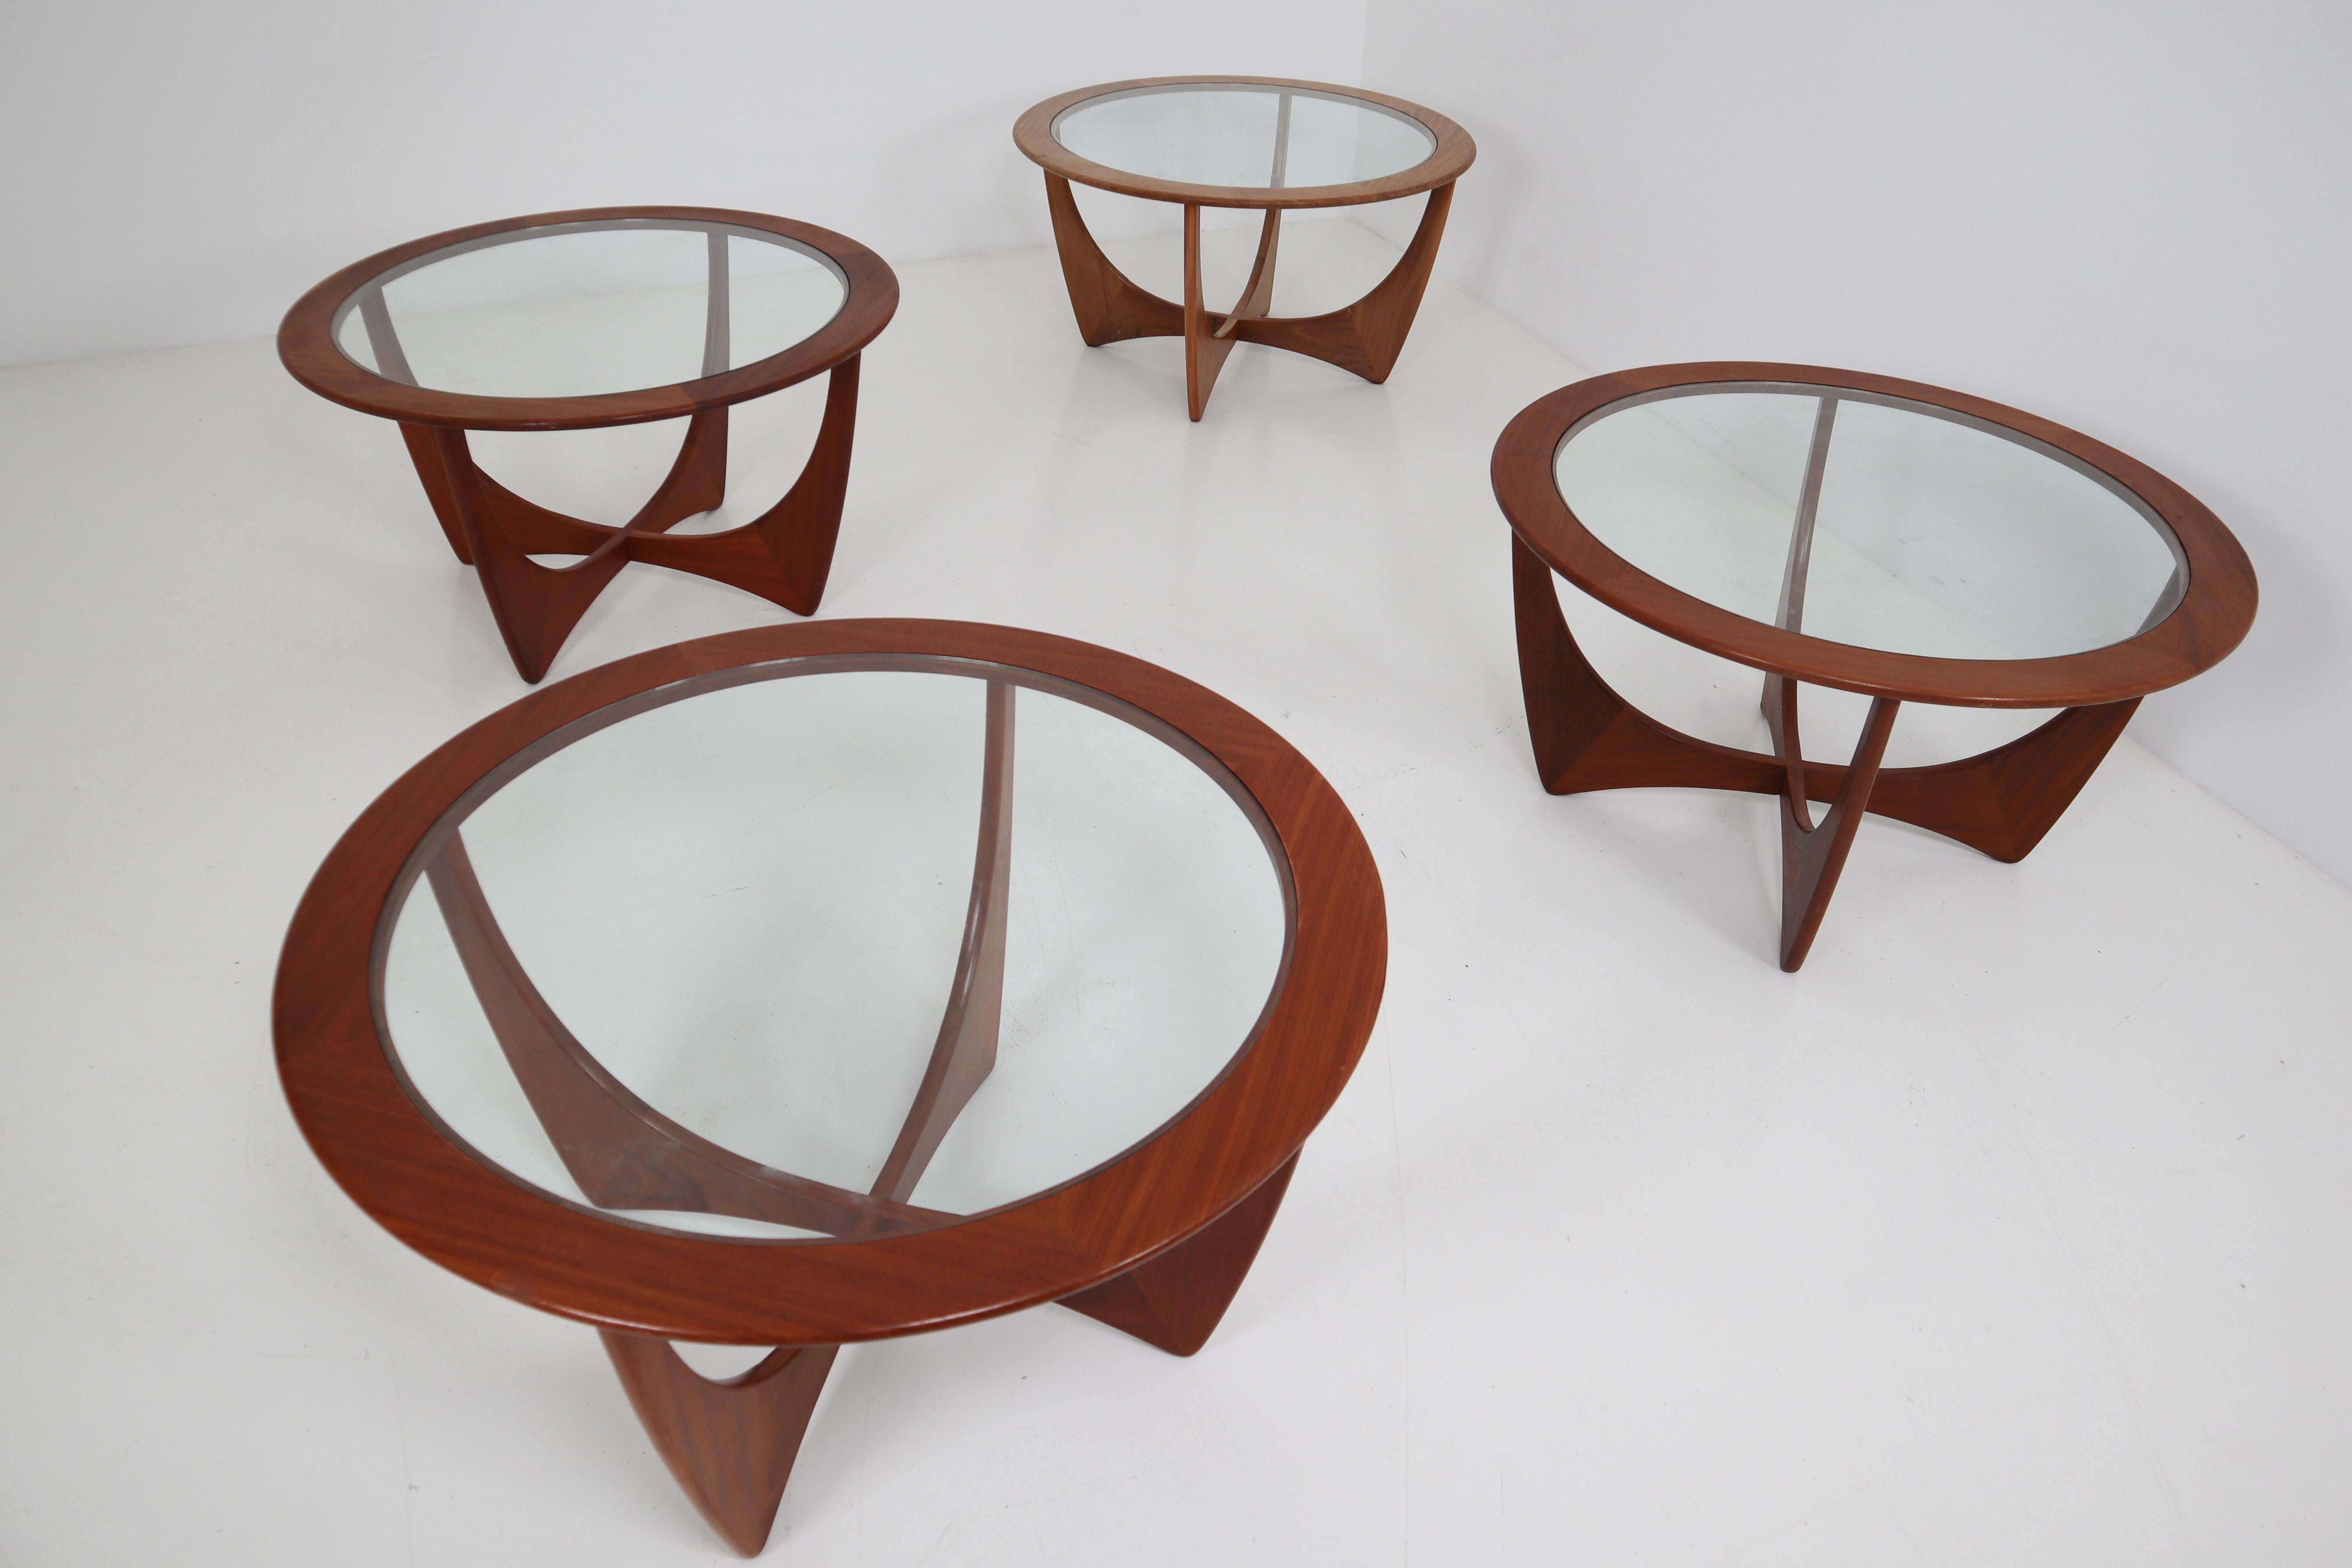 Four lovely tables of Afromosia wood with glass tops was designed by V.B. Wilkins as part of his Astro line for G-Plan. The scale makes them suitable for use as either end tables or coffee tables. England, circa 1960s. Excellent vintage